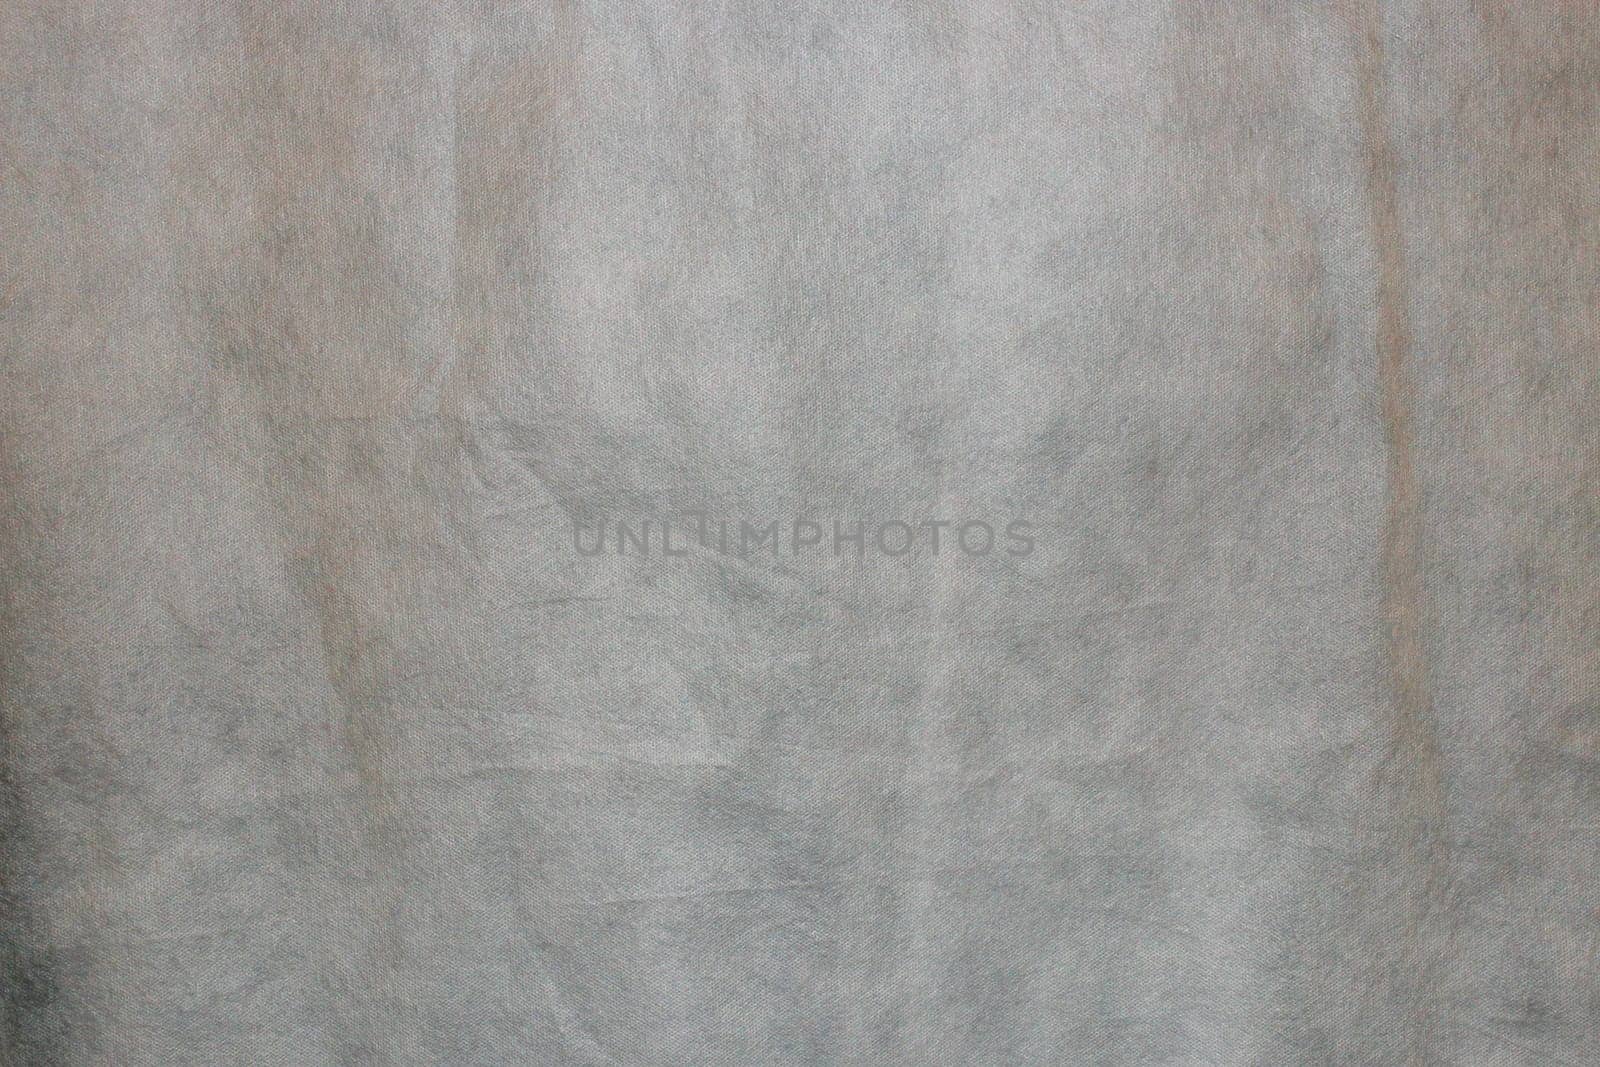 White non-woven fabric as a background texture. by gelog67